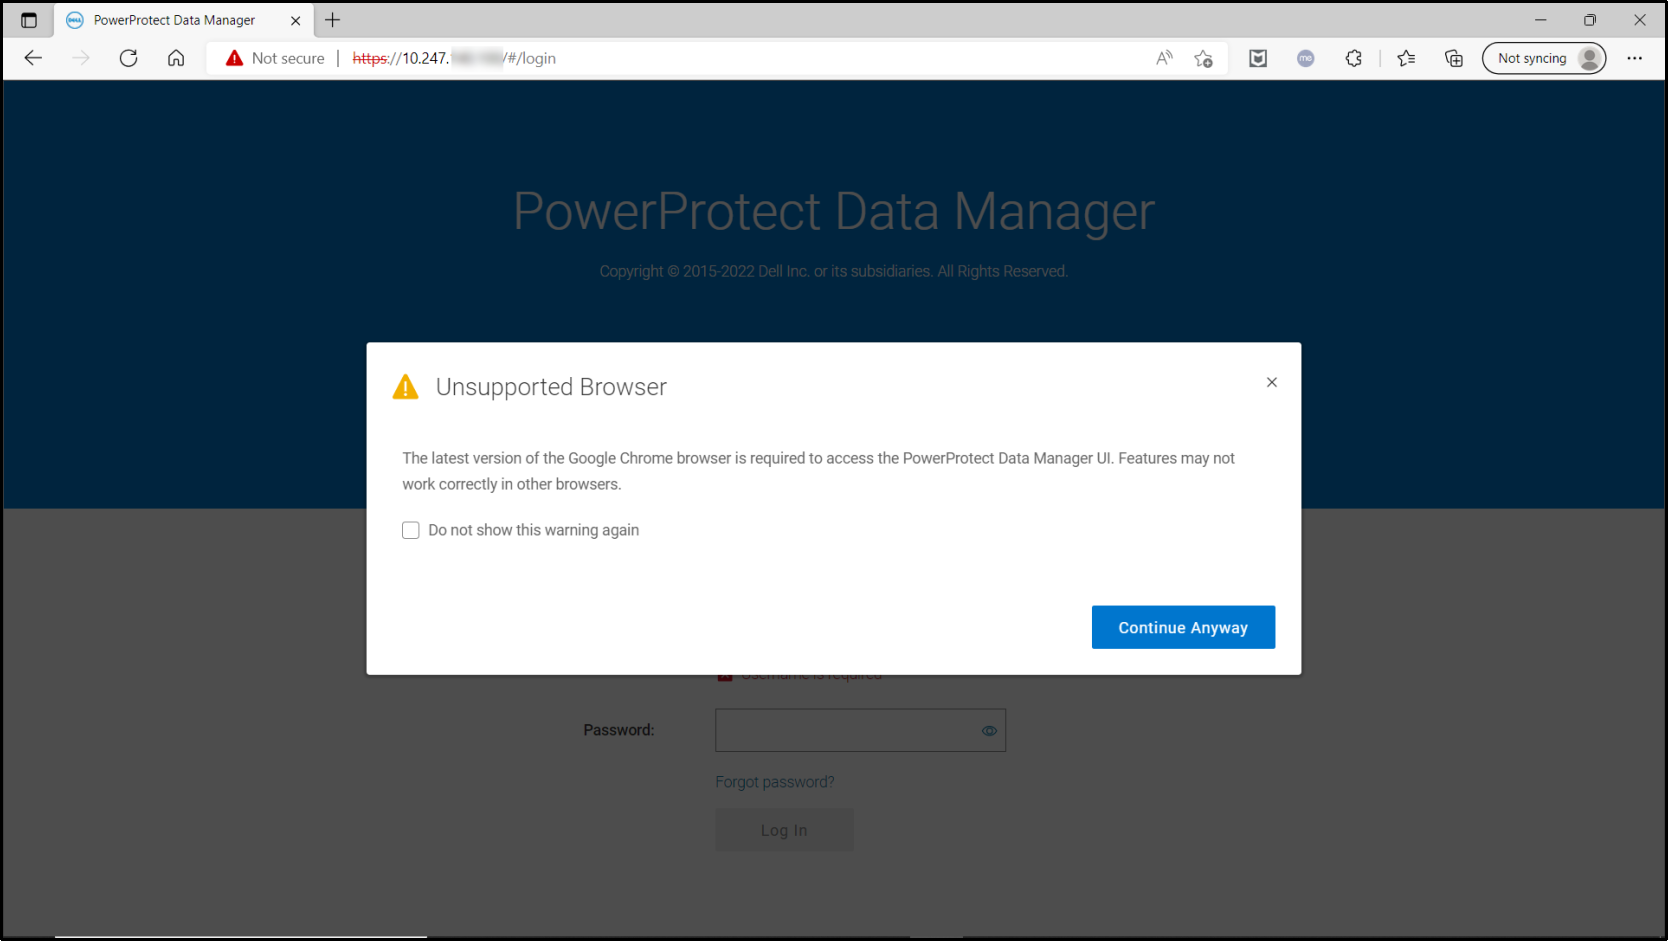 The image depicts a warning message when the PowerProtect Data manager Appliance is launched using an unsupported web browser.